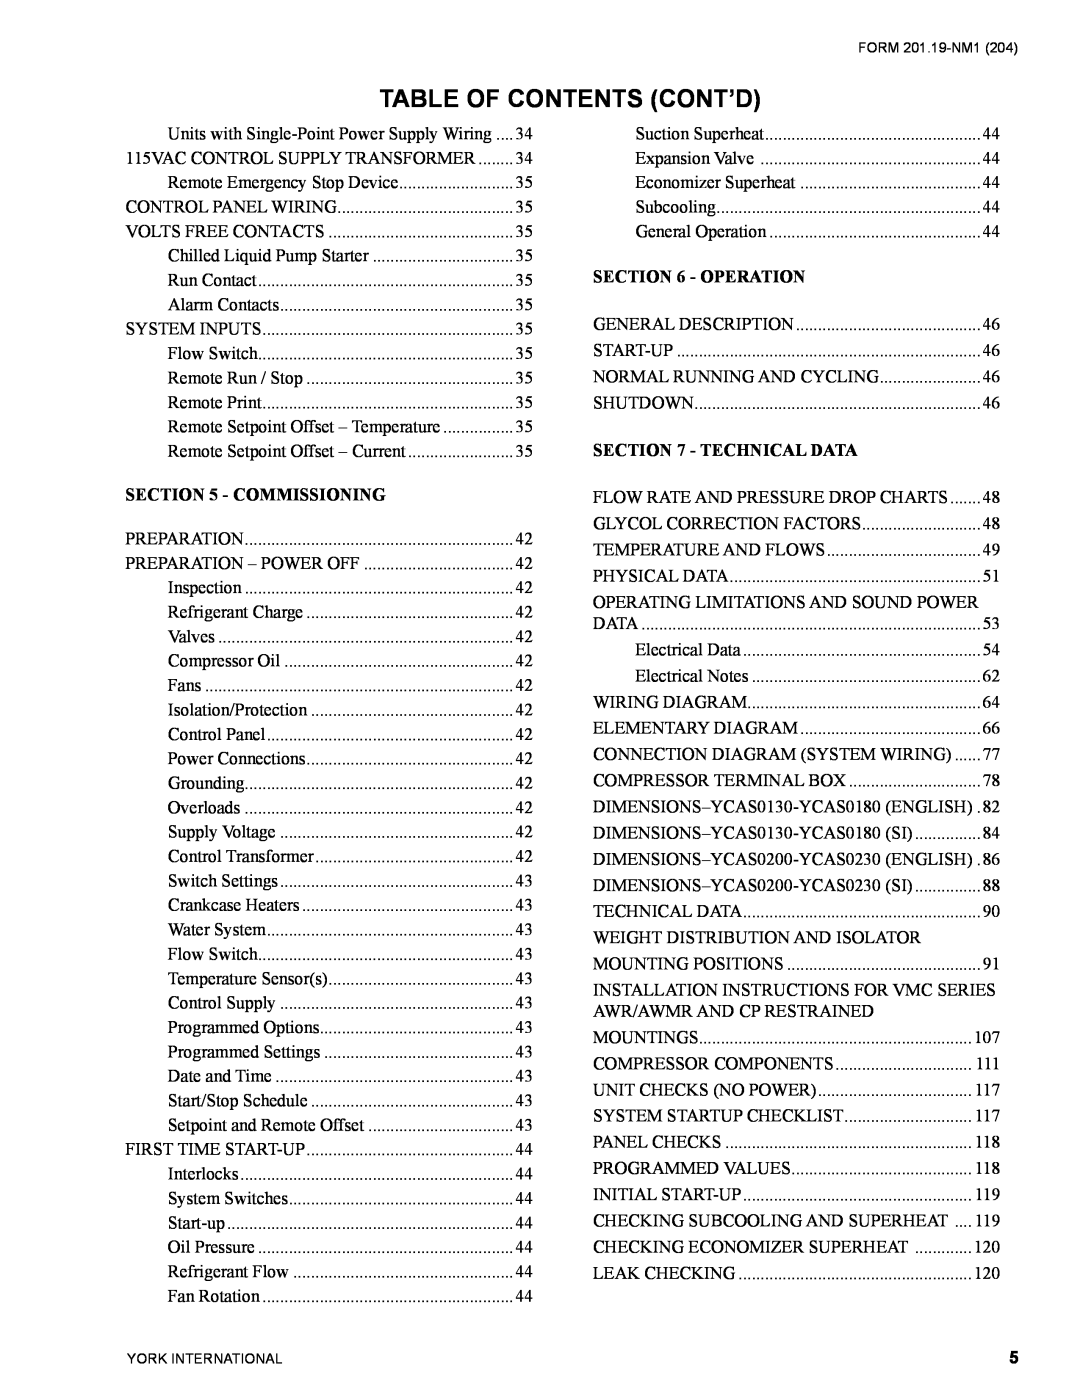 York YCAS0130 manual Table Of Contents Cont’D, Commissioning, Operation, Technical Data 